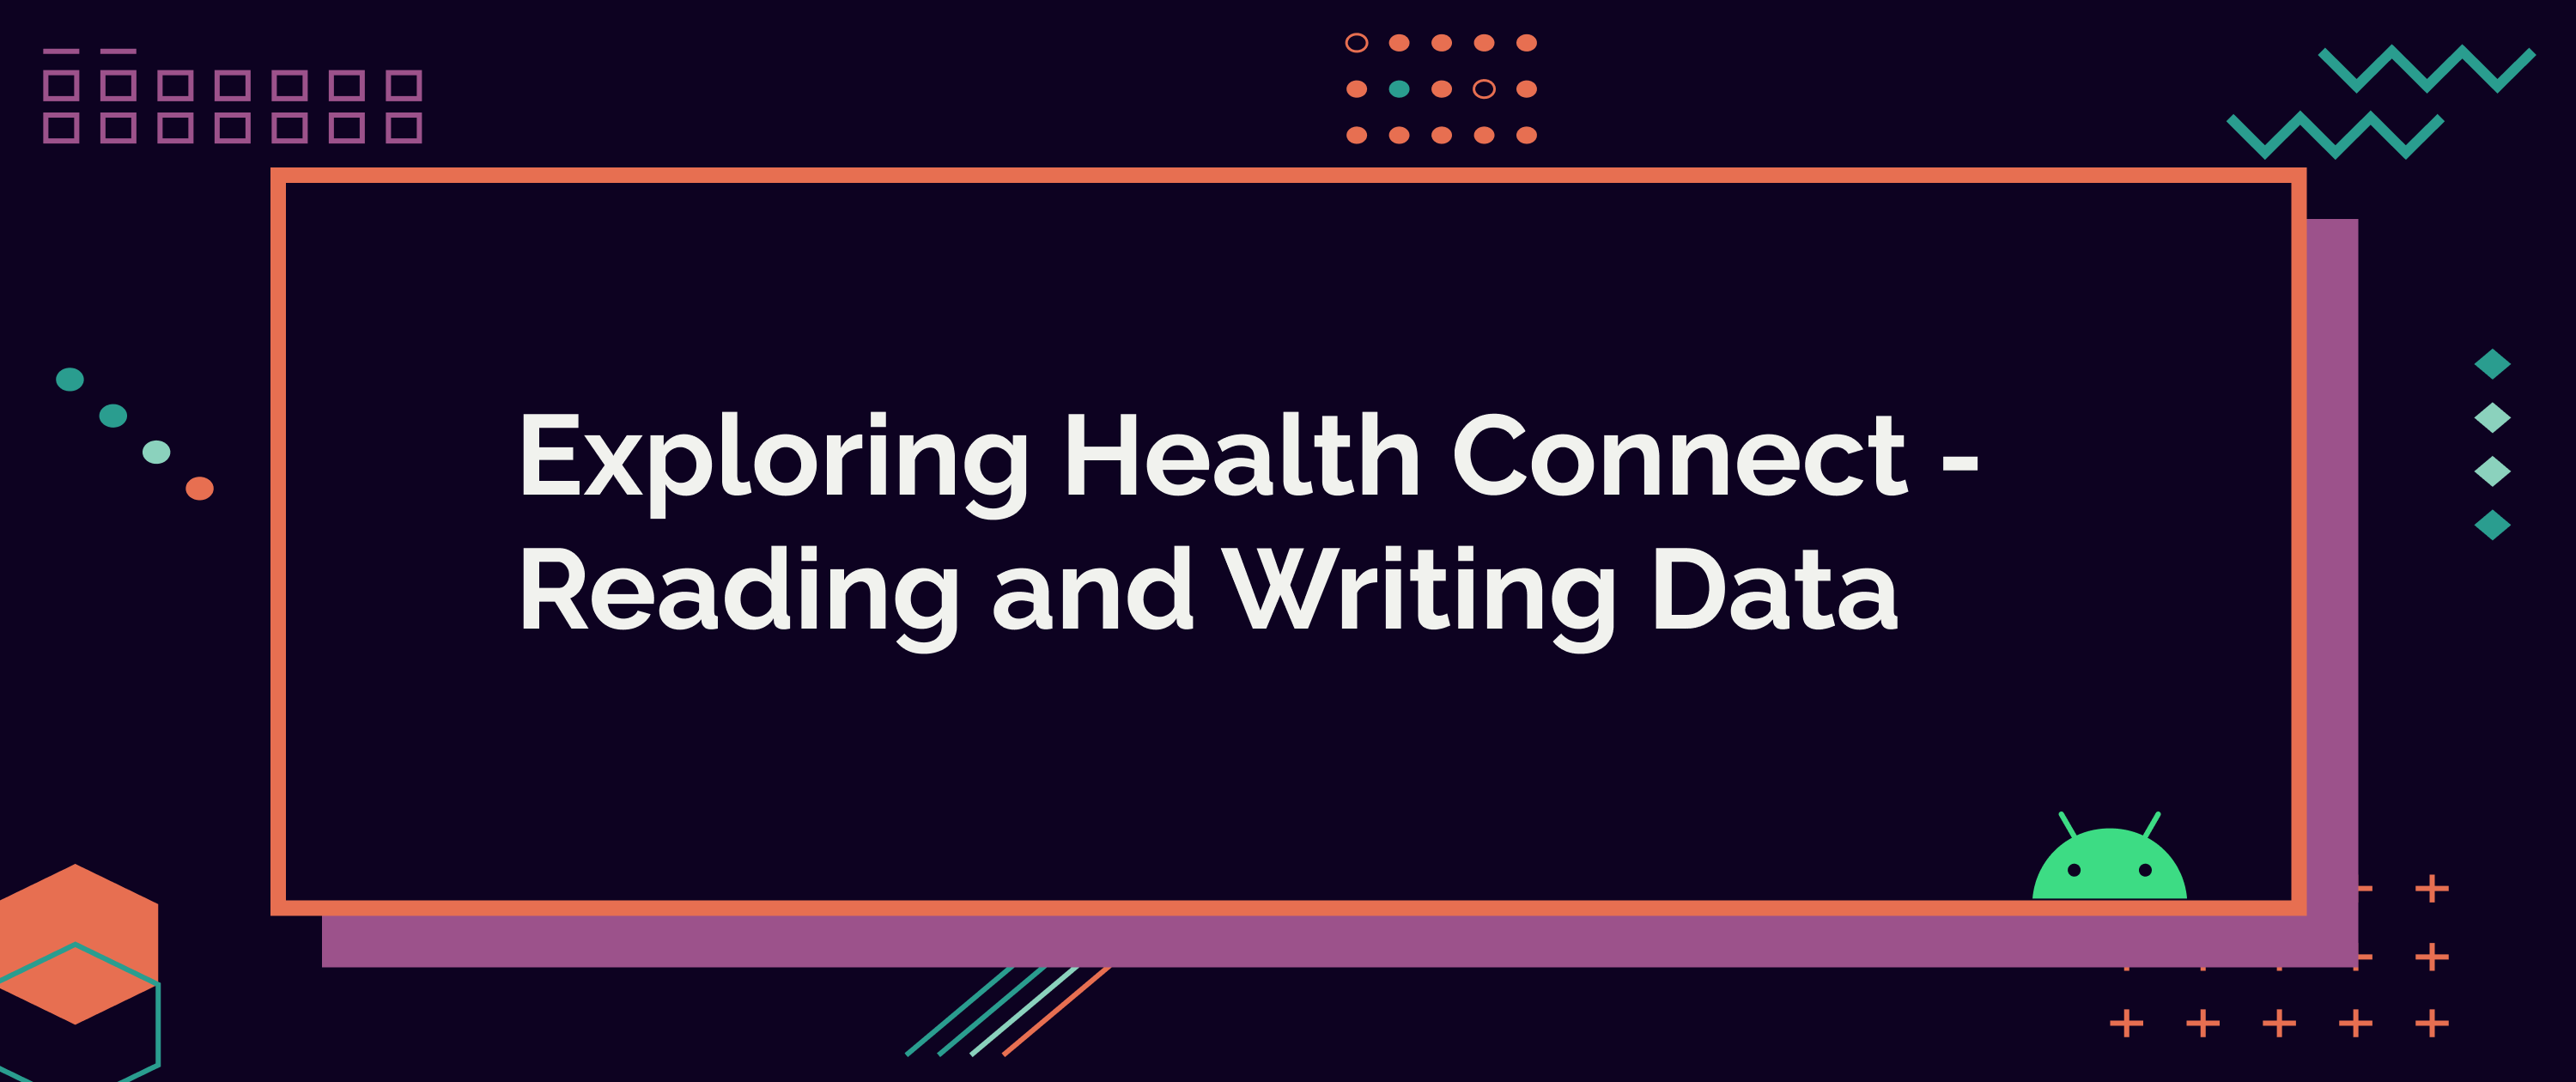 Exploring Health Connect - Reading and Writing Data